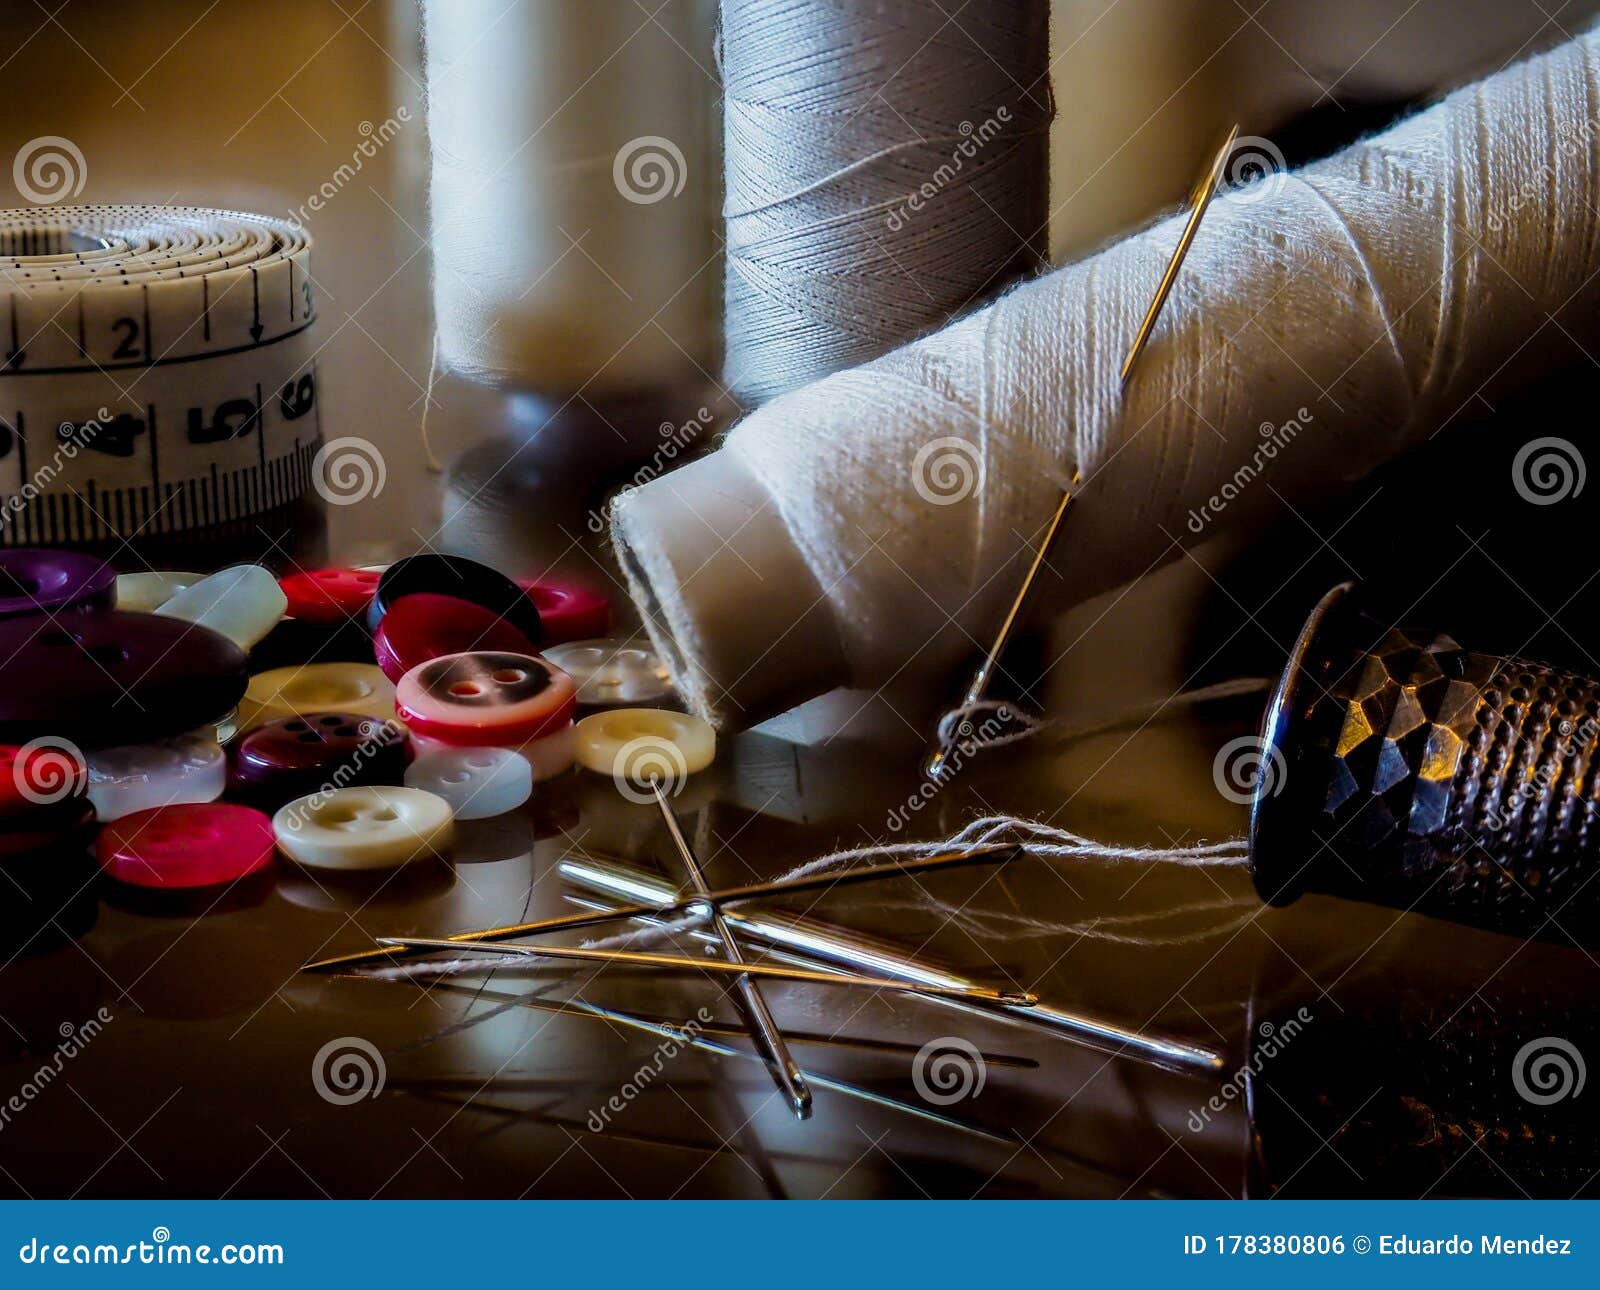 Still life of sewing items stock photo. Image of crystal - 178380806